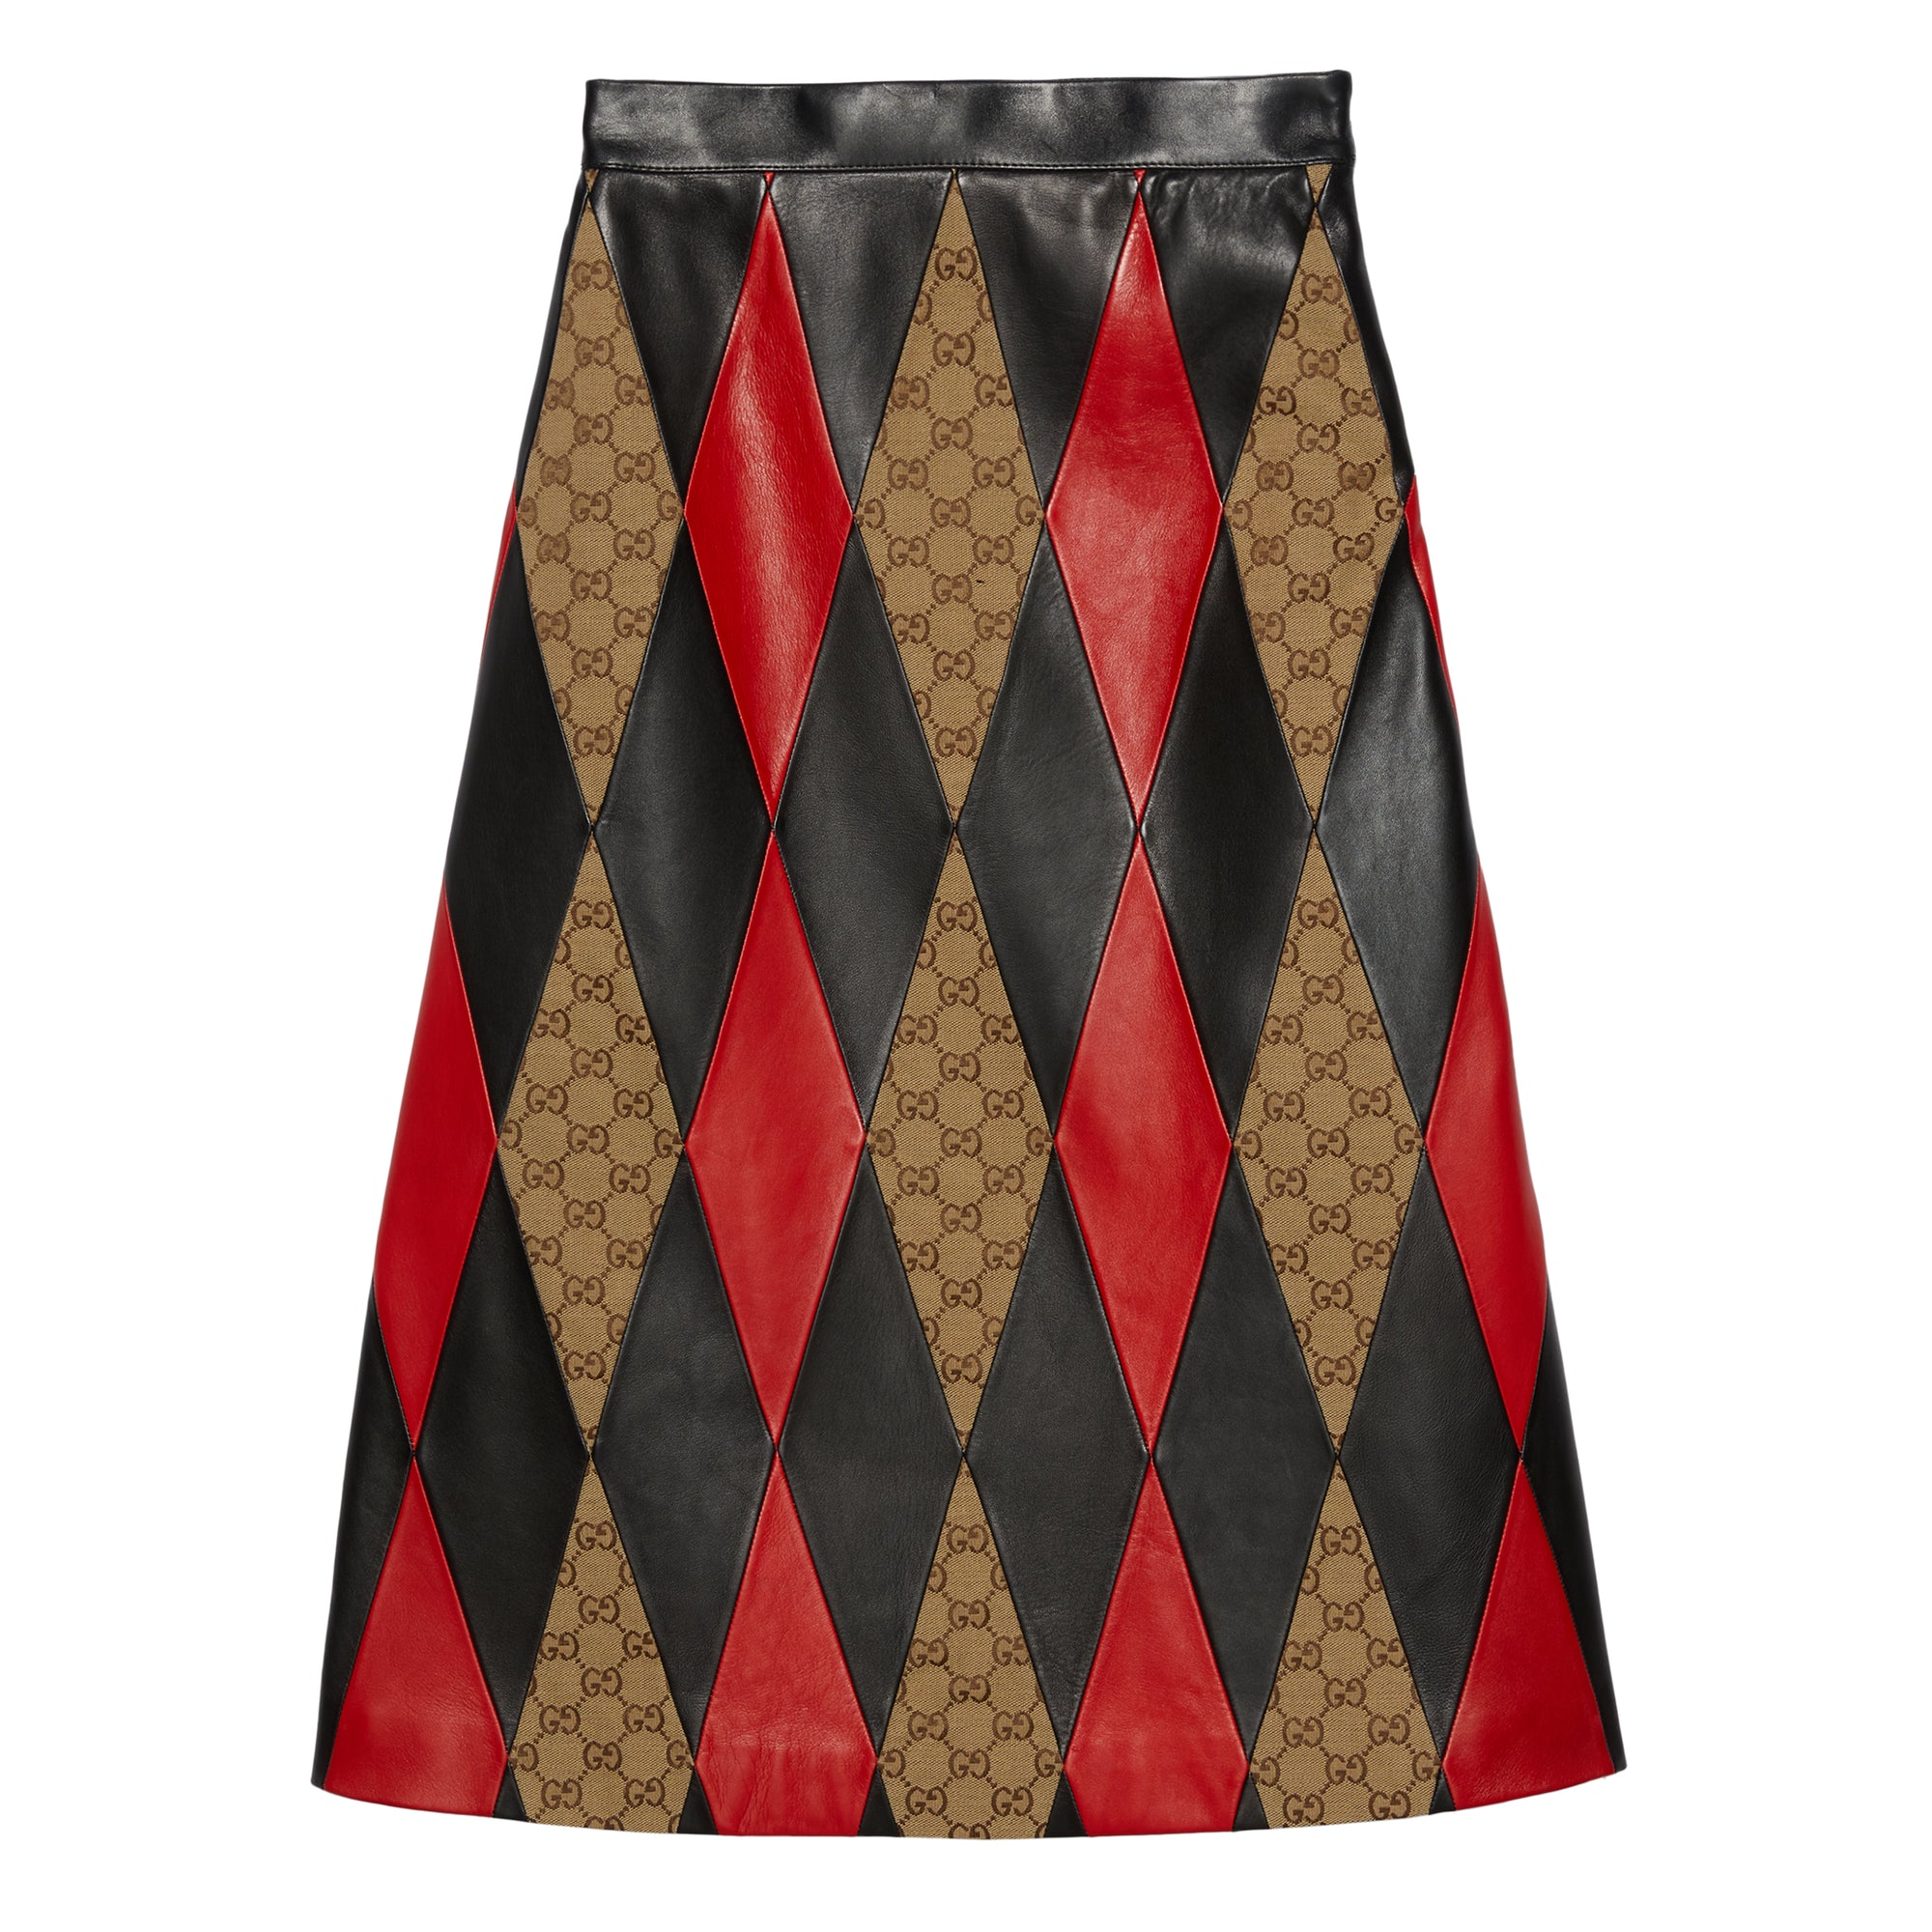 Gucci - Women’s DSM Exclusive Intarsia Leather Midi Skirt - (Black/Red) view 1